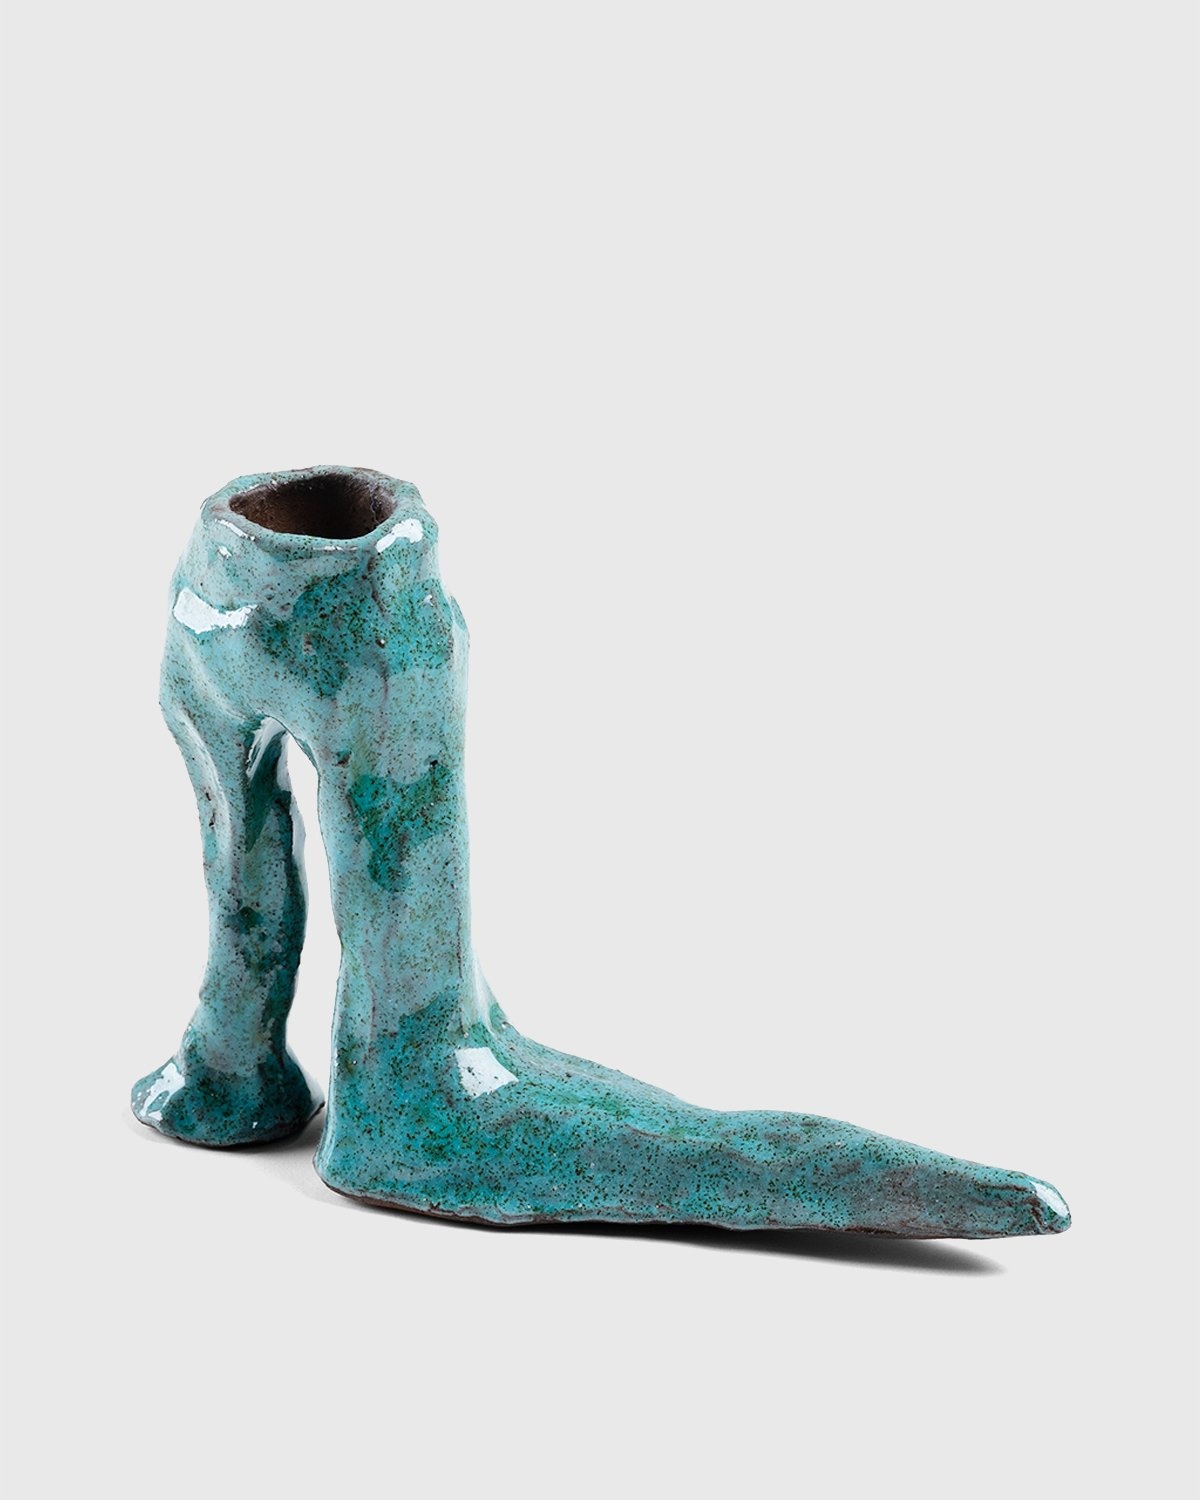 Laura Welker – Candle Holder Turquoise - Candles - Green - Image 2